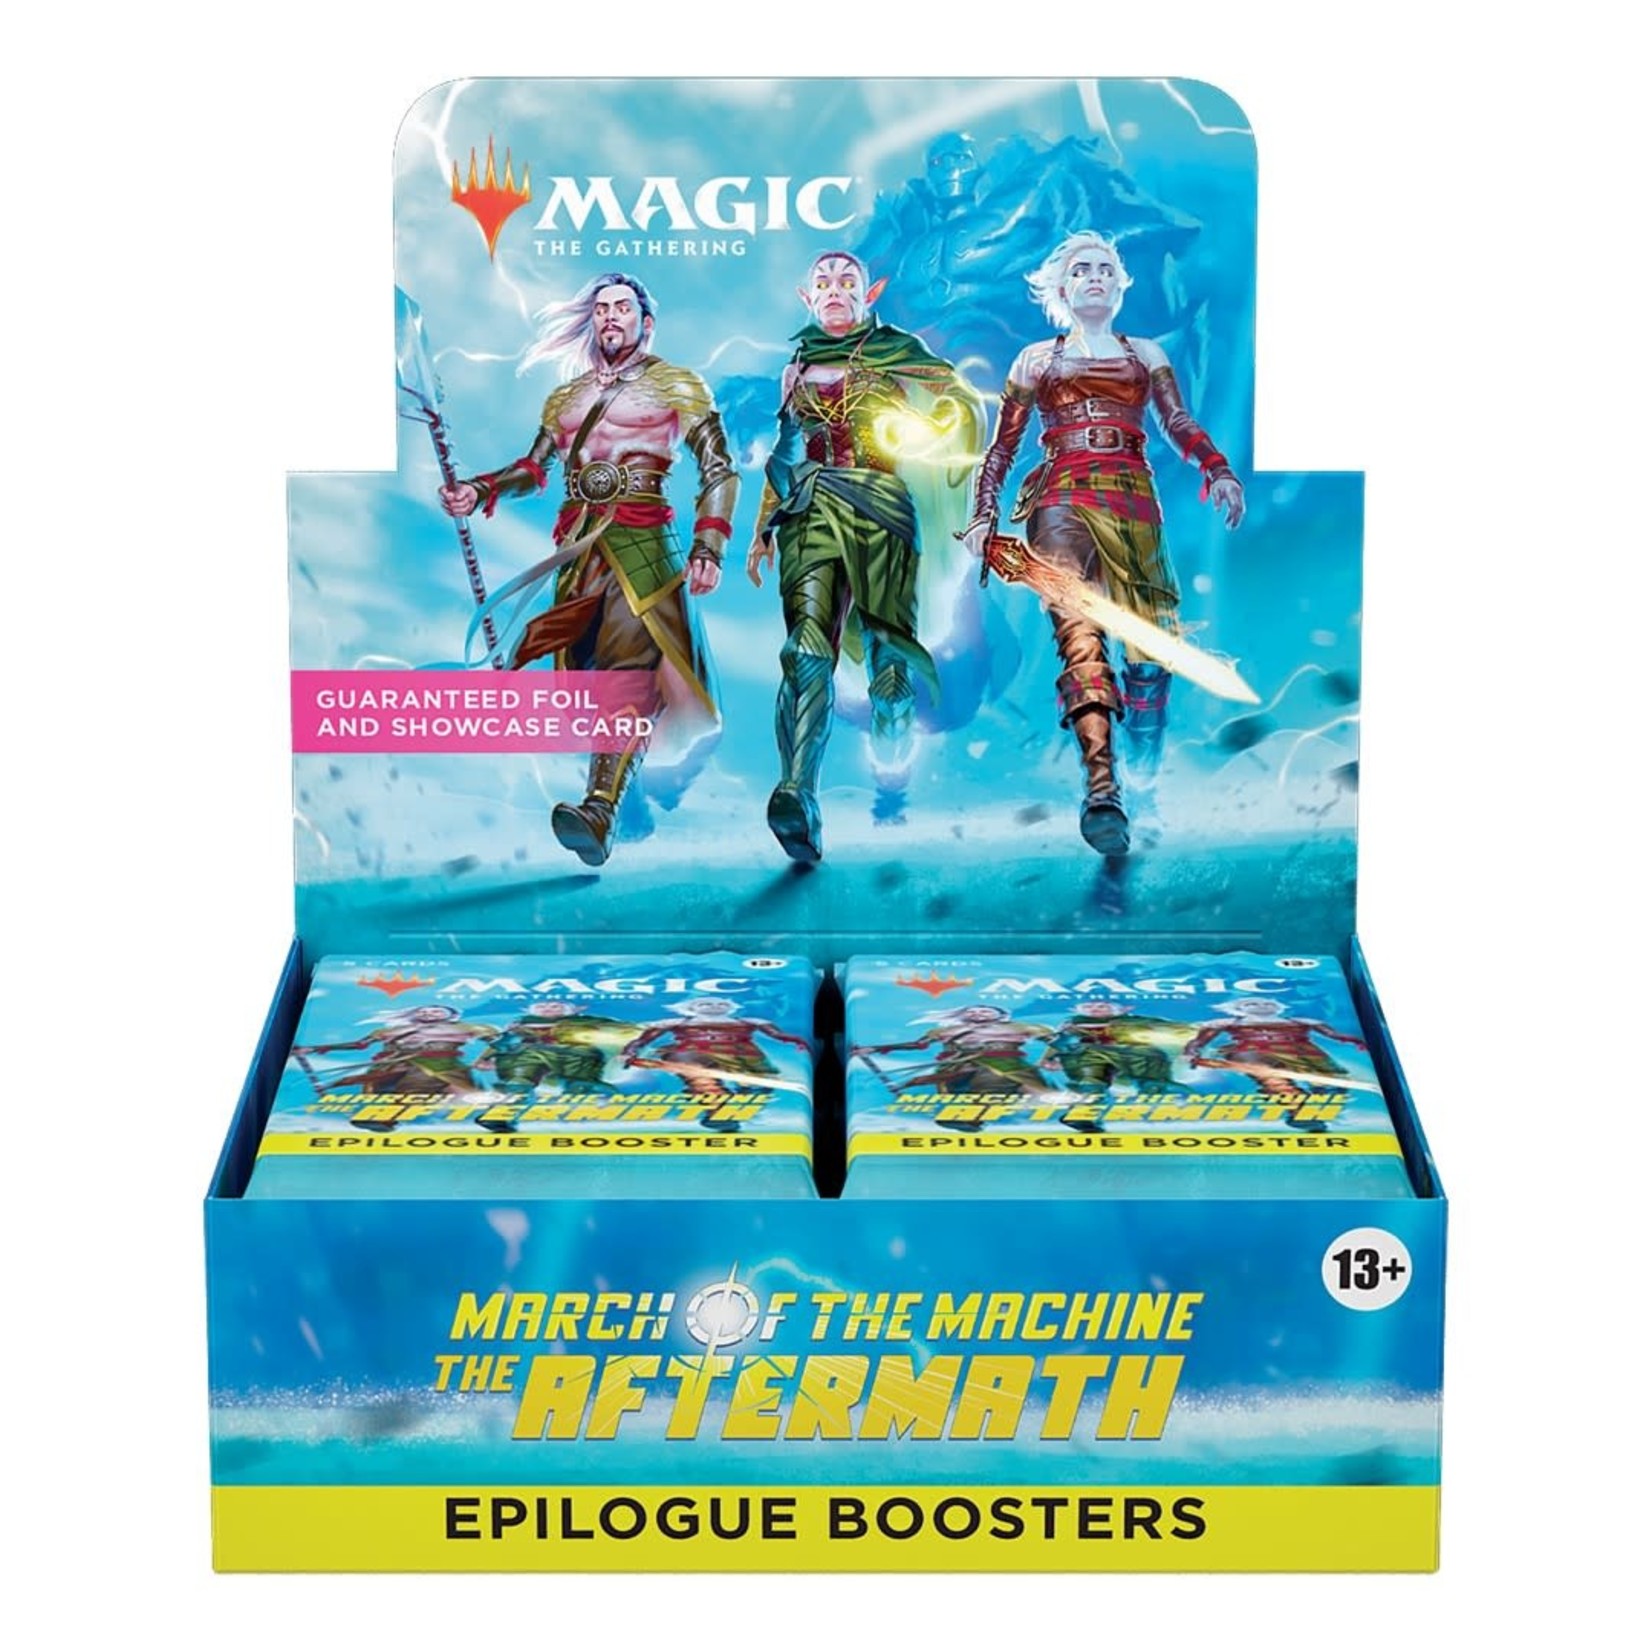 Wizards of the Coast Magic the Gathering March of the Machine Aftermath Epilogue Booster Box